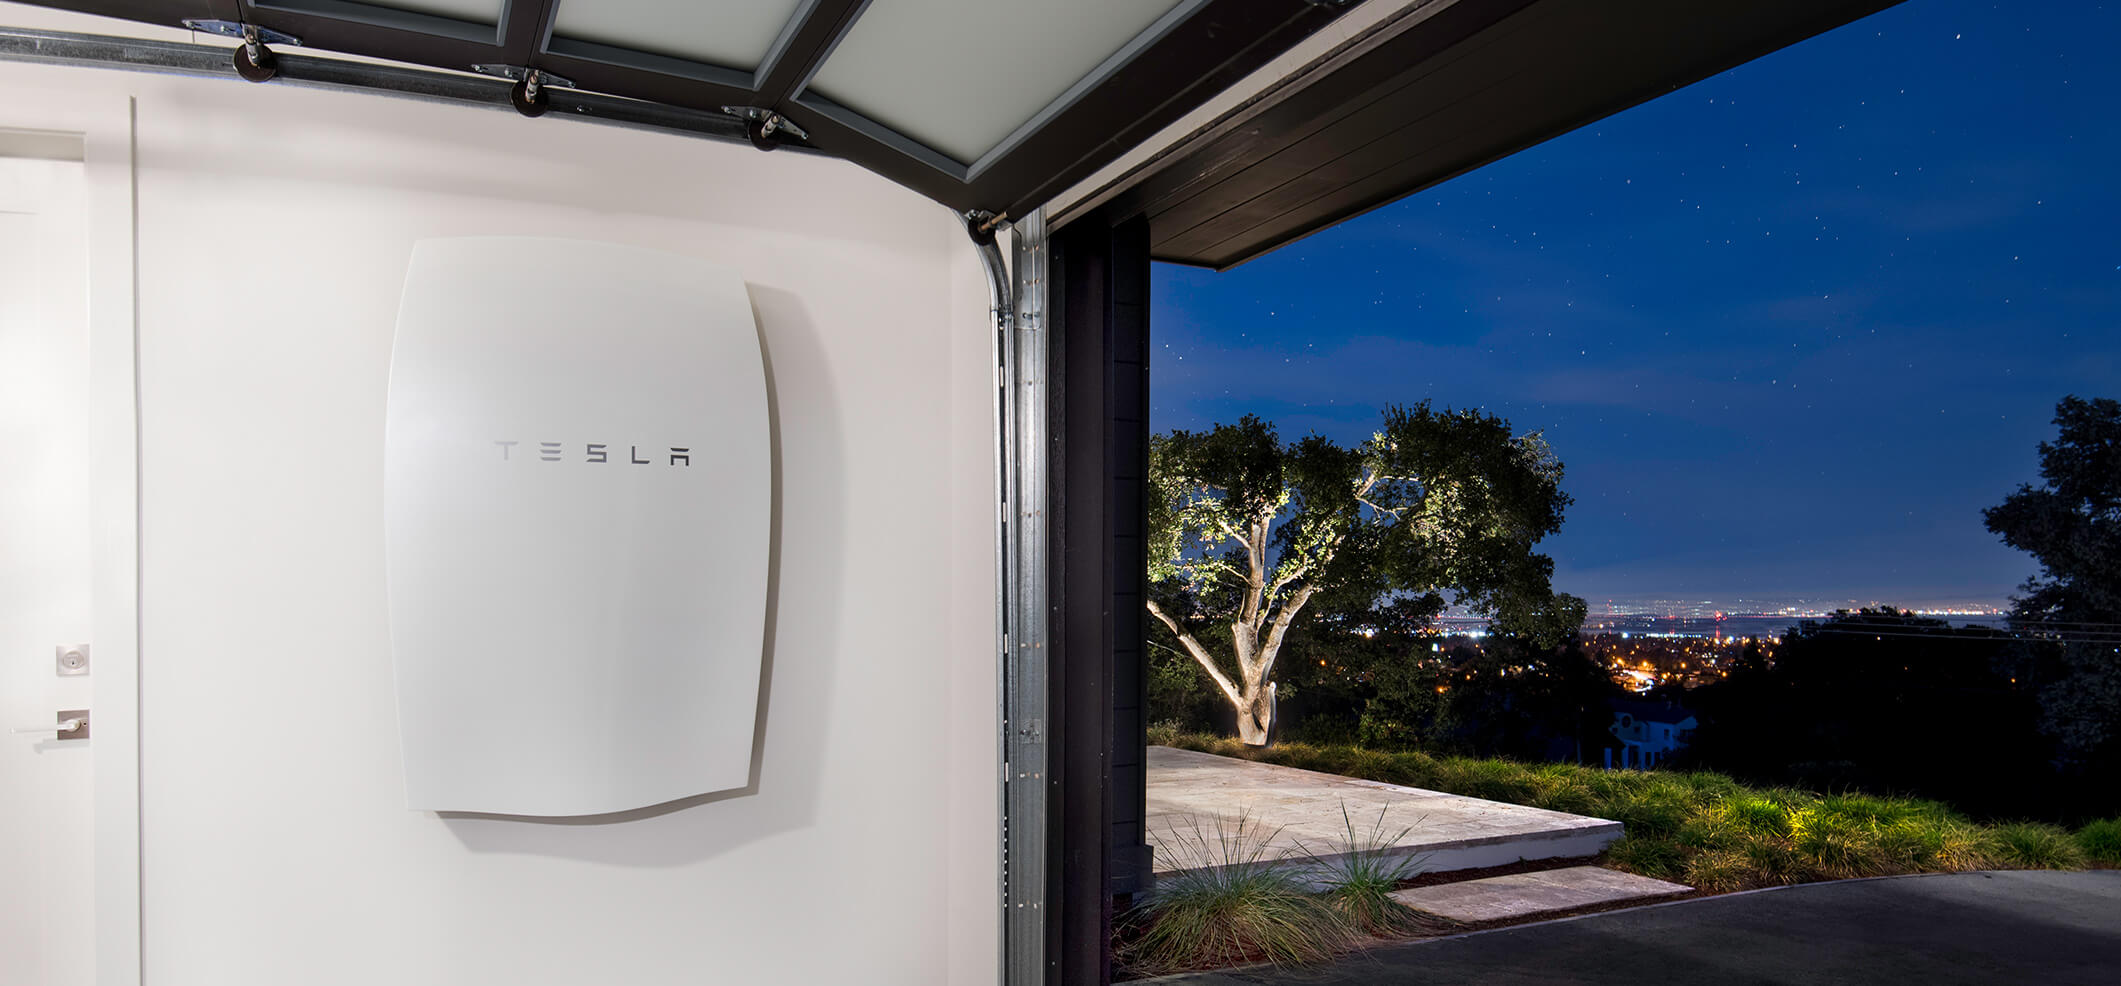 Buy used tesla model s 60 near you. Tesla Powerwall is coming to Canada with first 'Tesla Energy Authorized